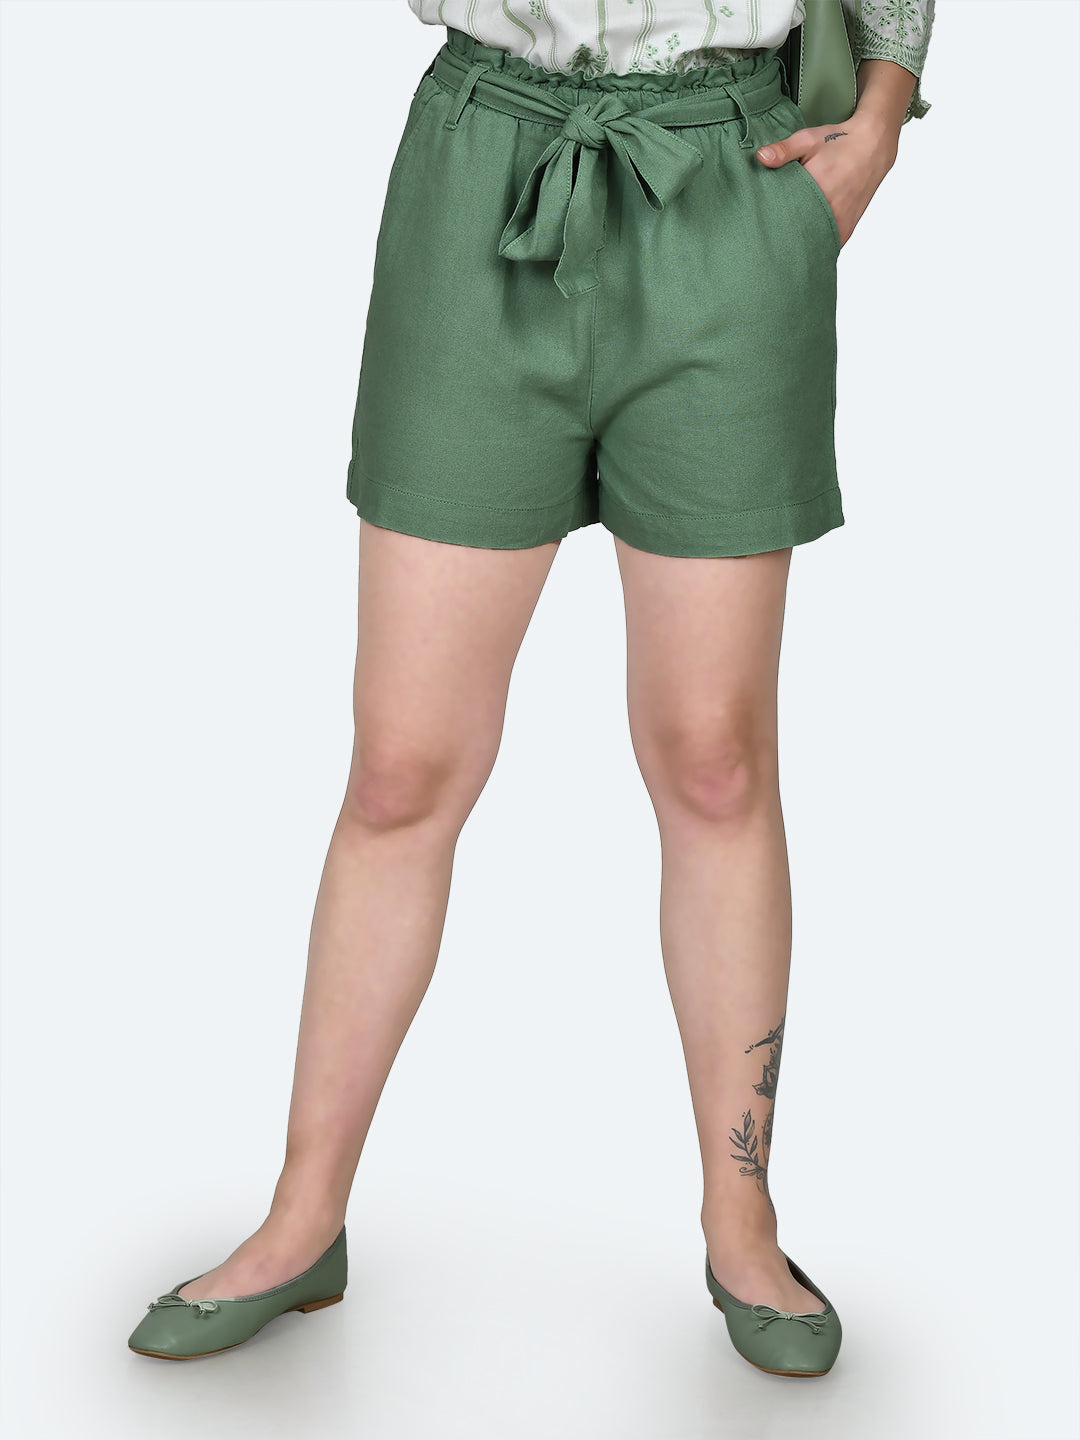 Green Solid Tie-Up Shorts For Women